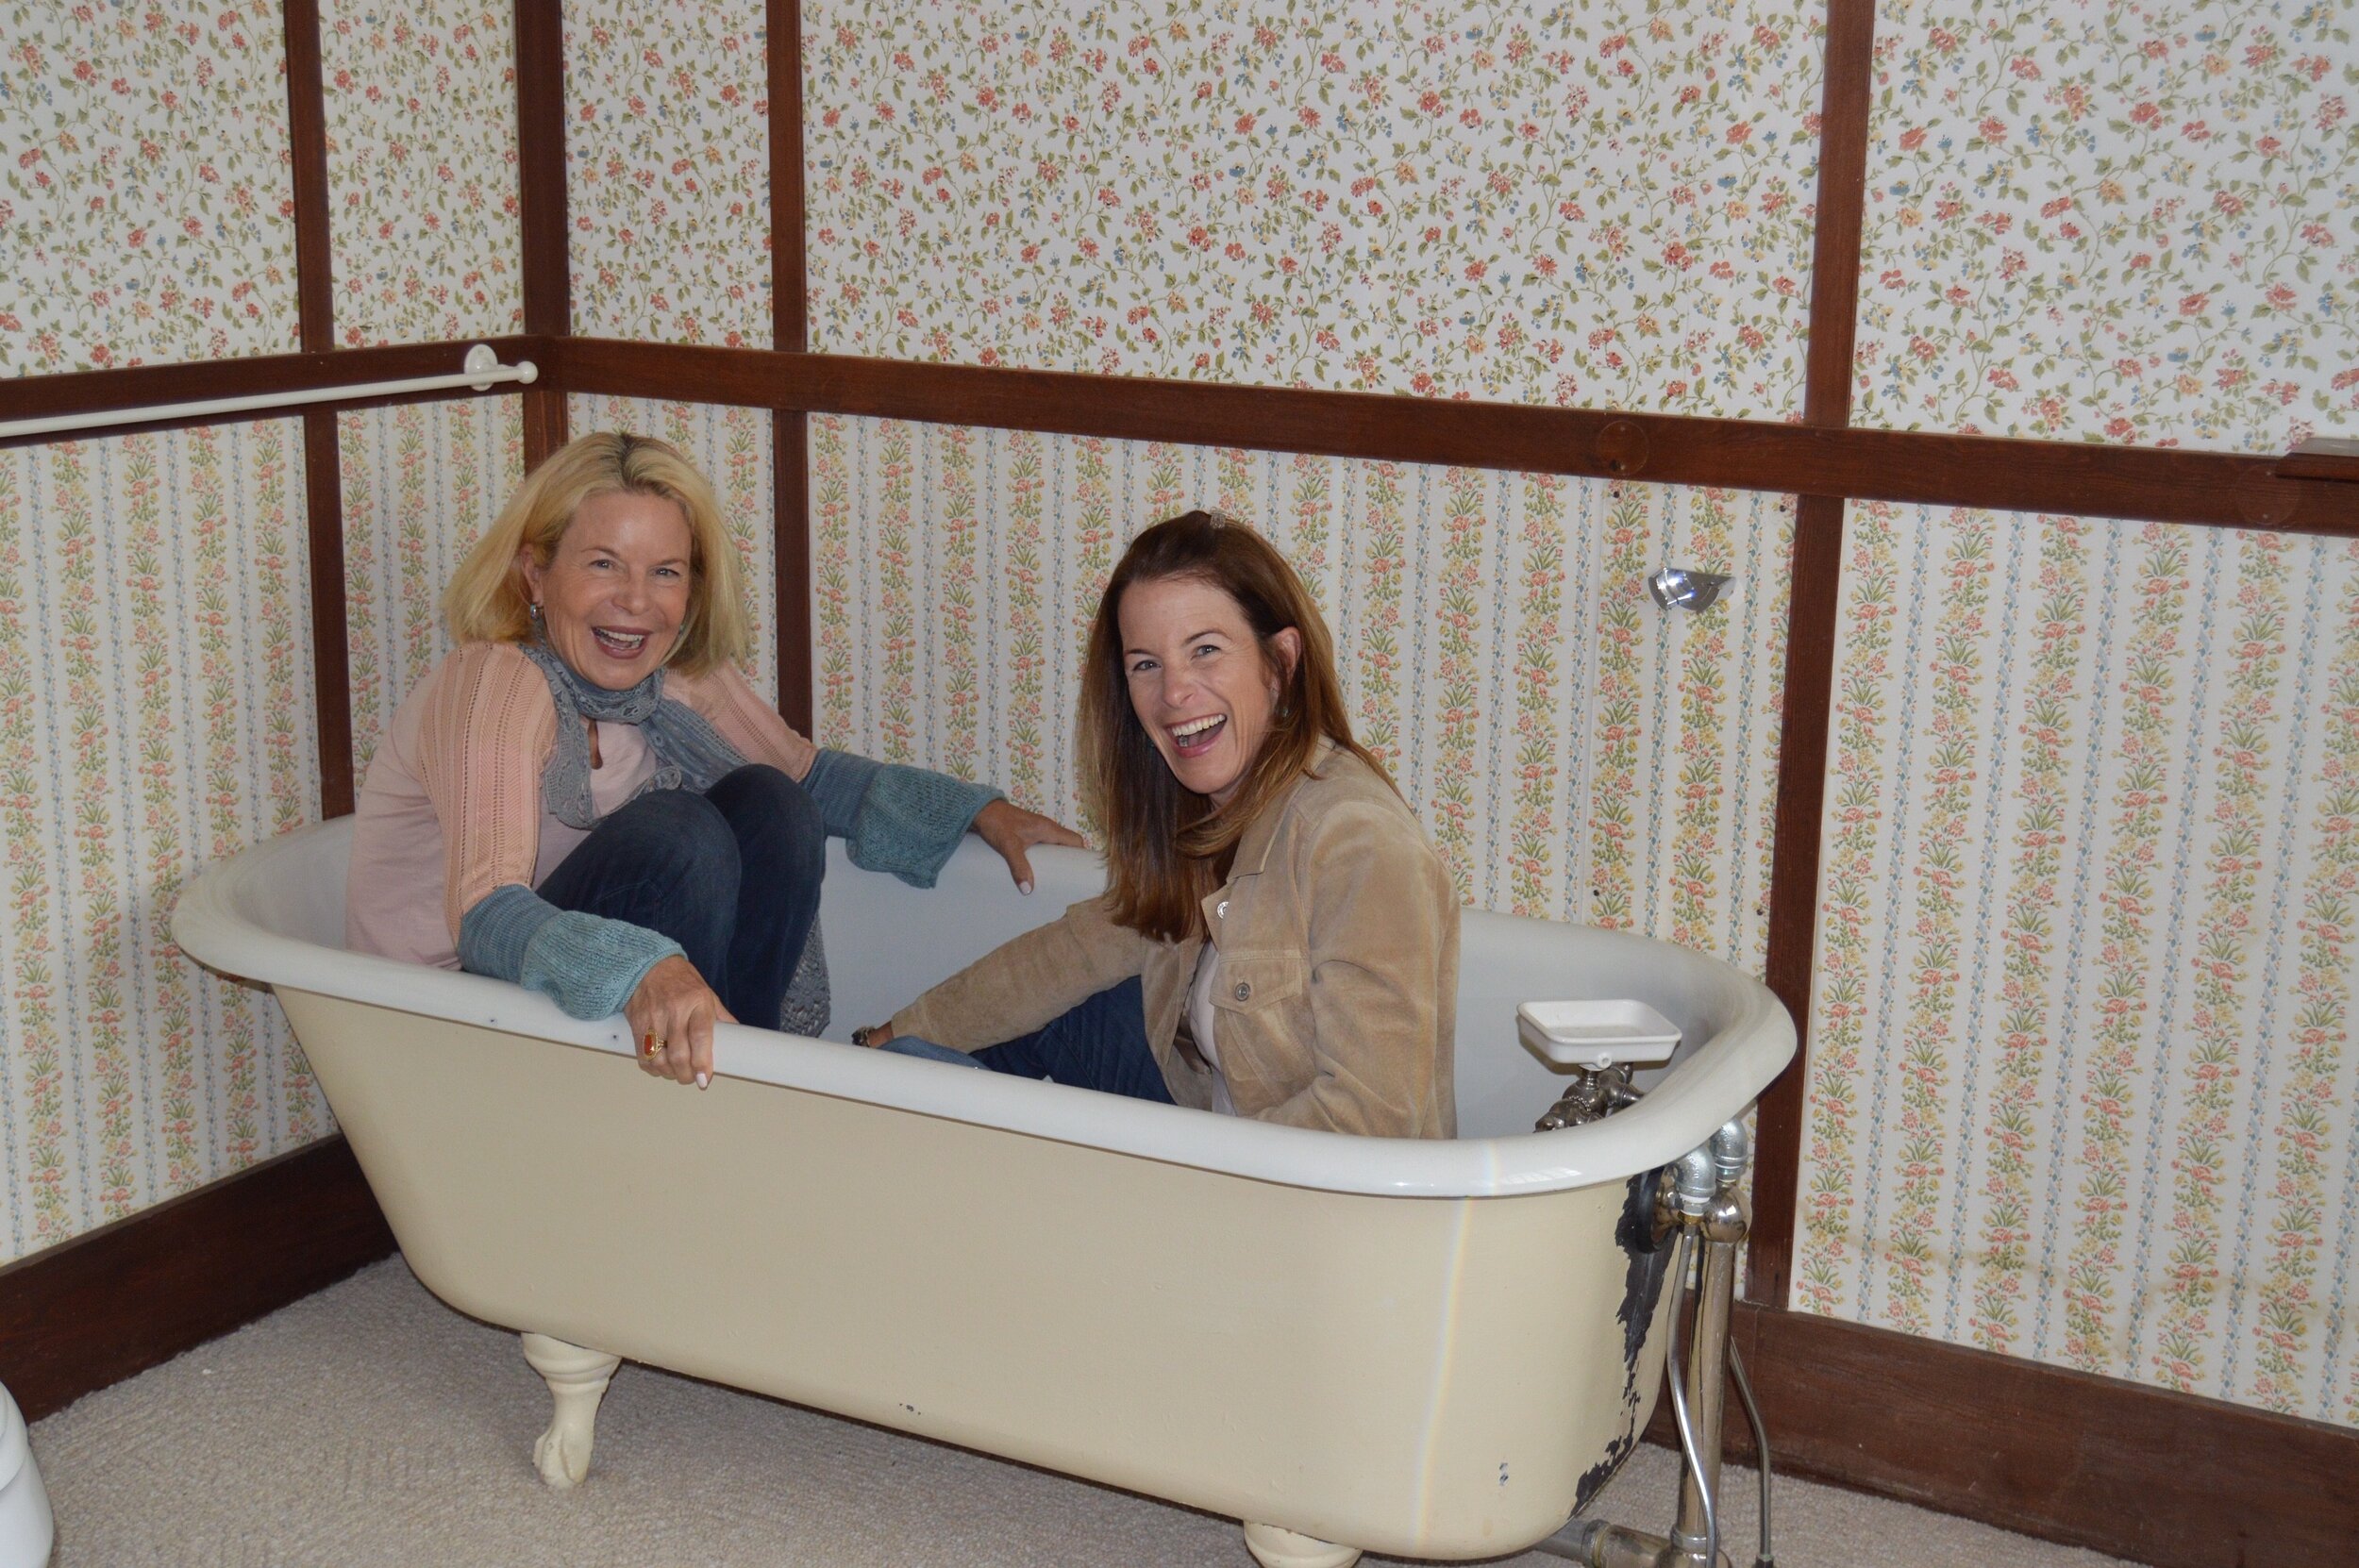 My youngest sister Caroline and I in the same bath tub during our visit in September